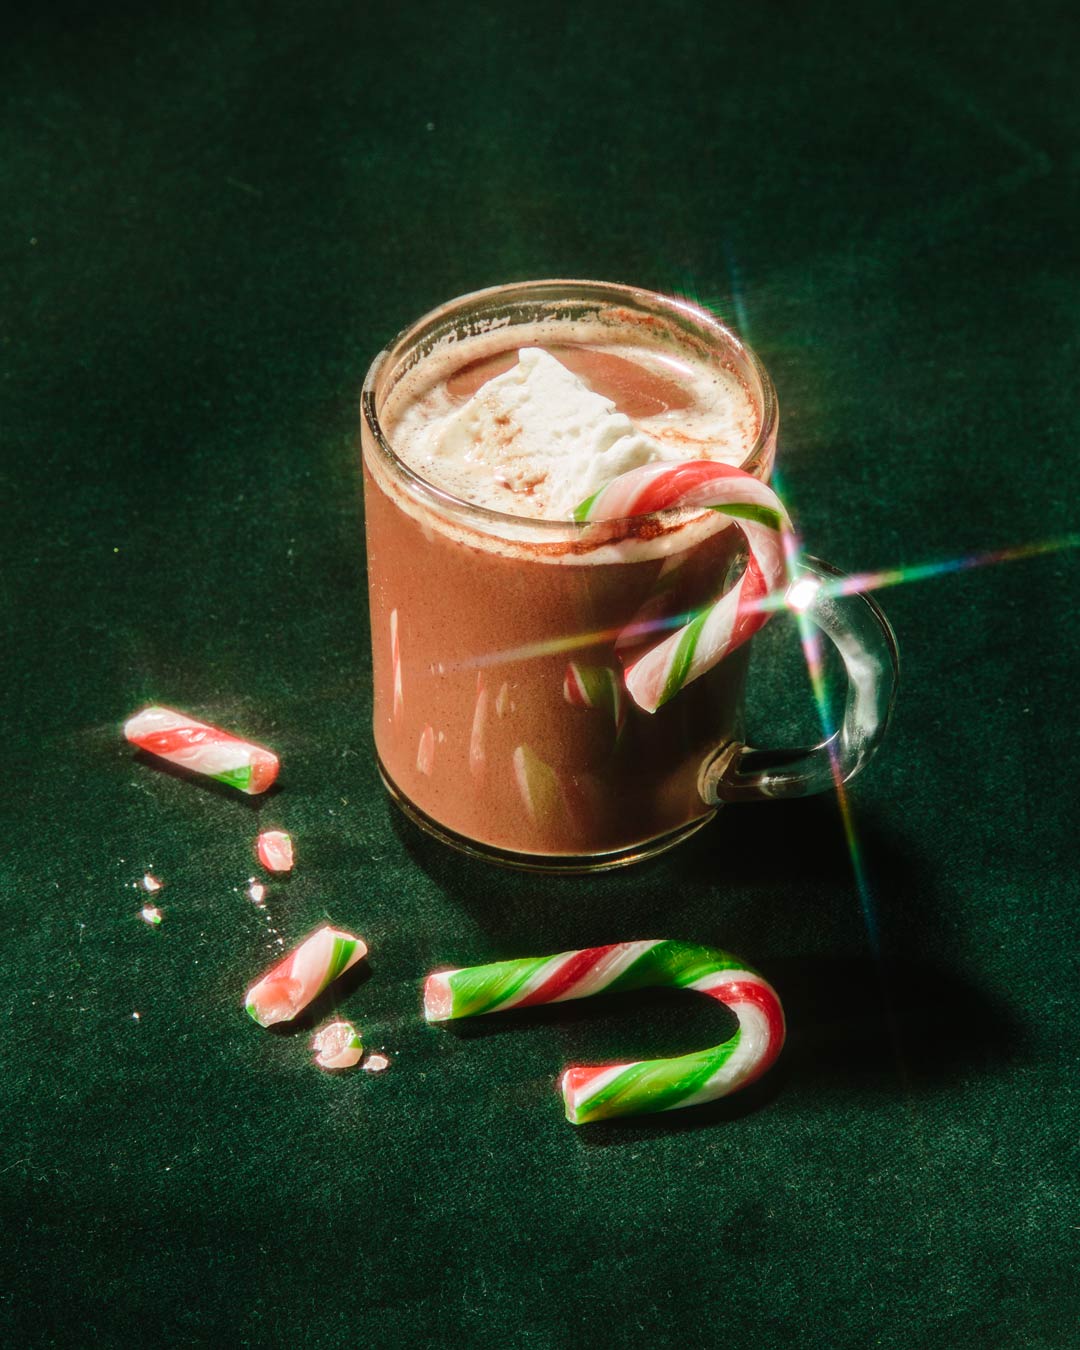 Candy Cane Hot Chocolate *Holiday Limited Edition*